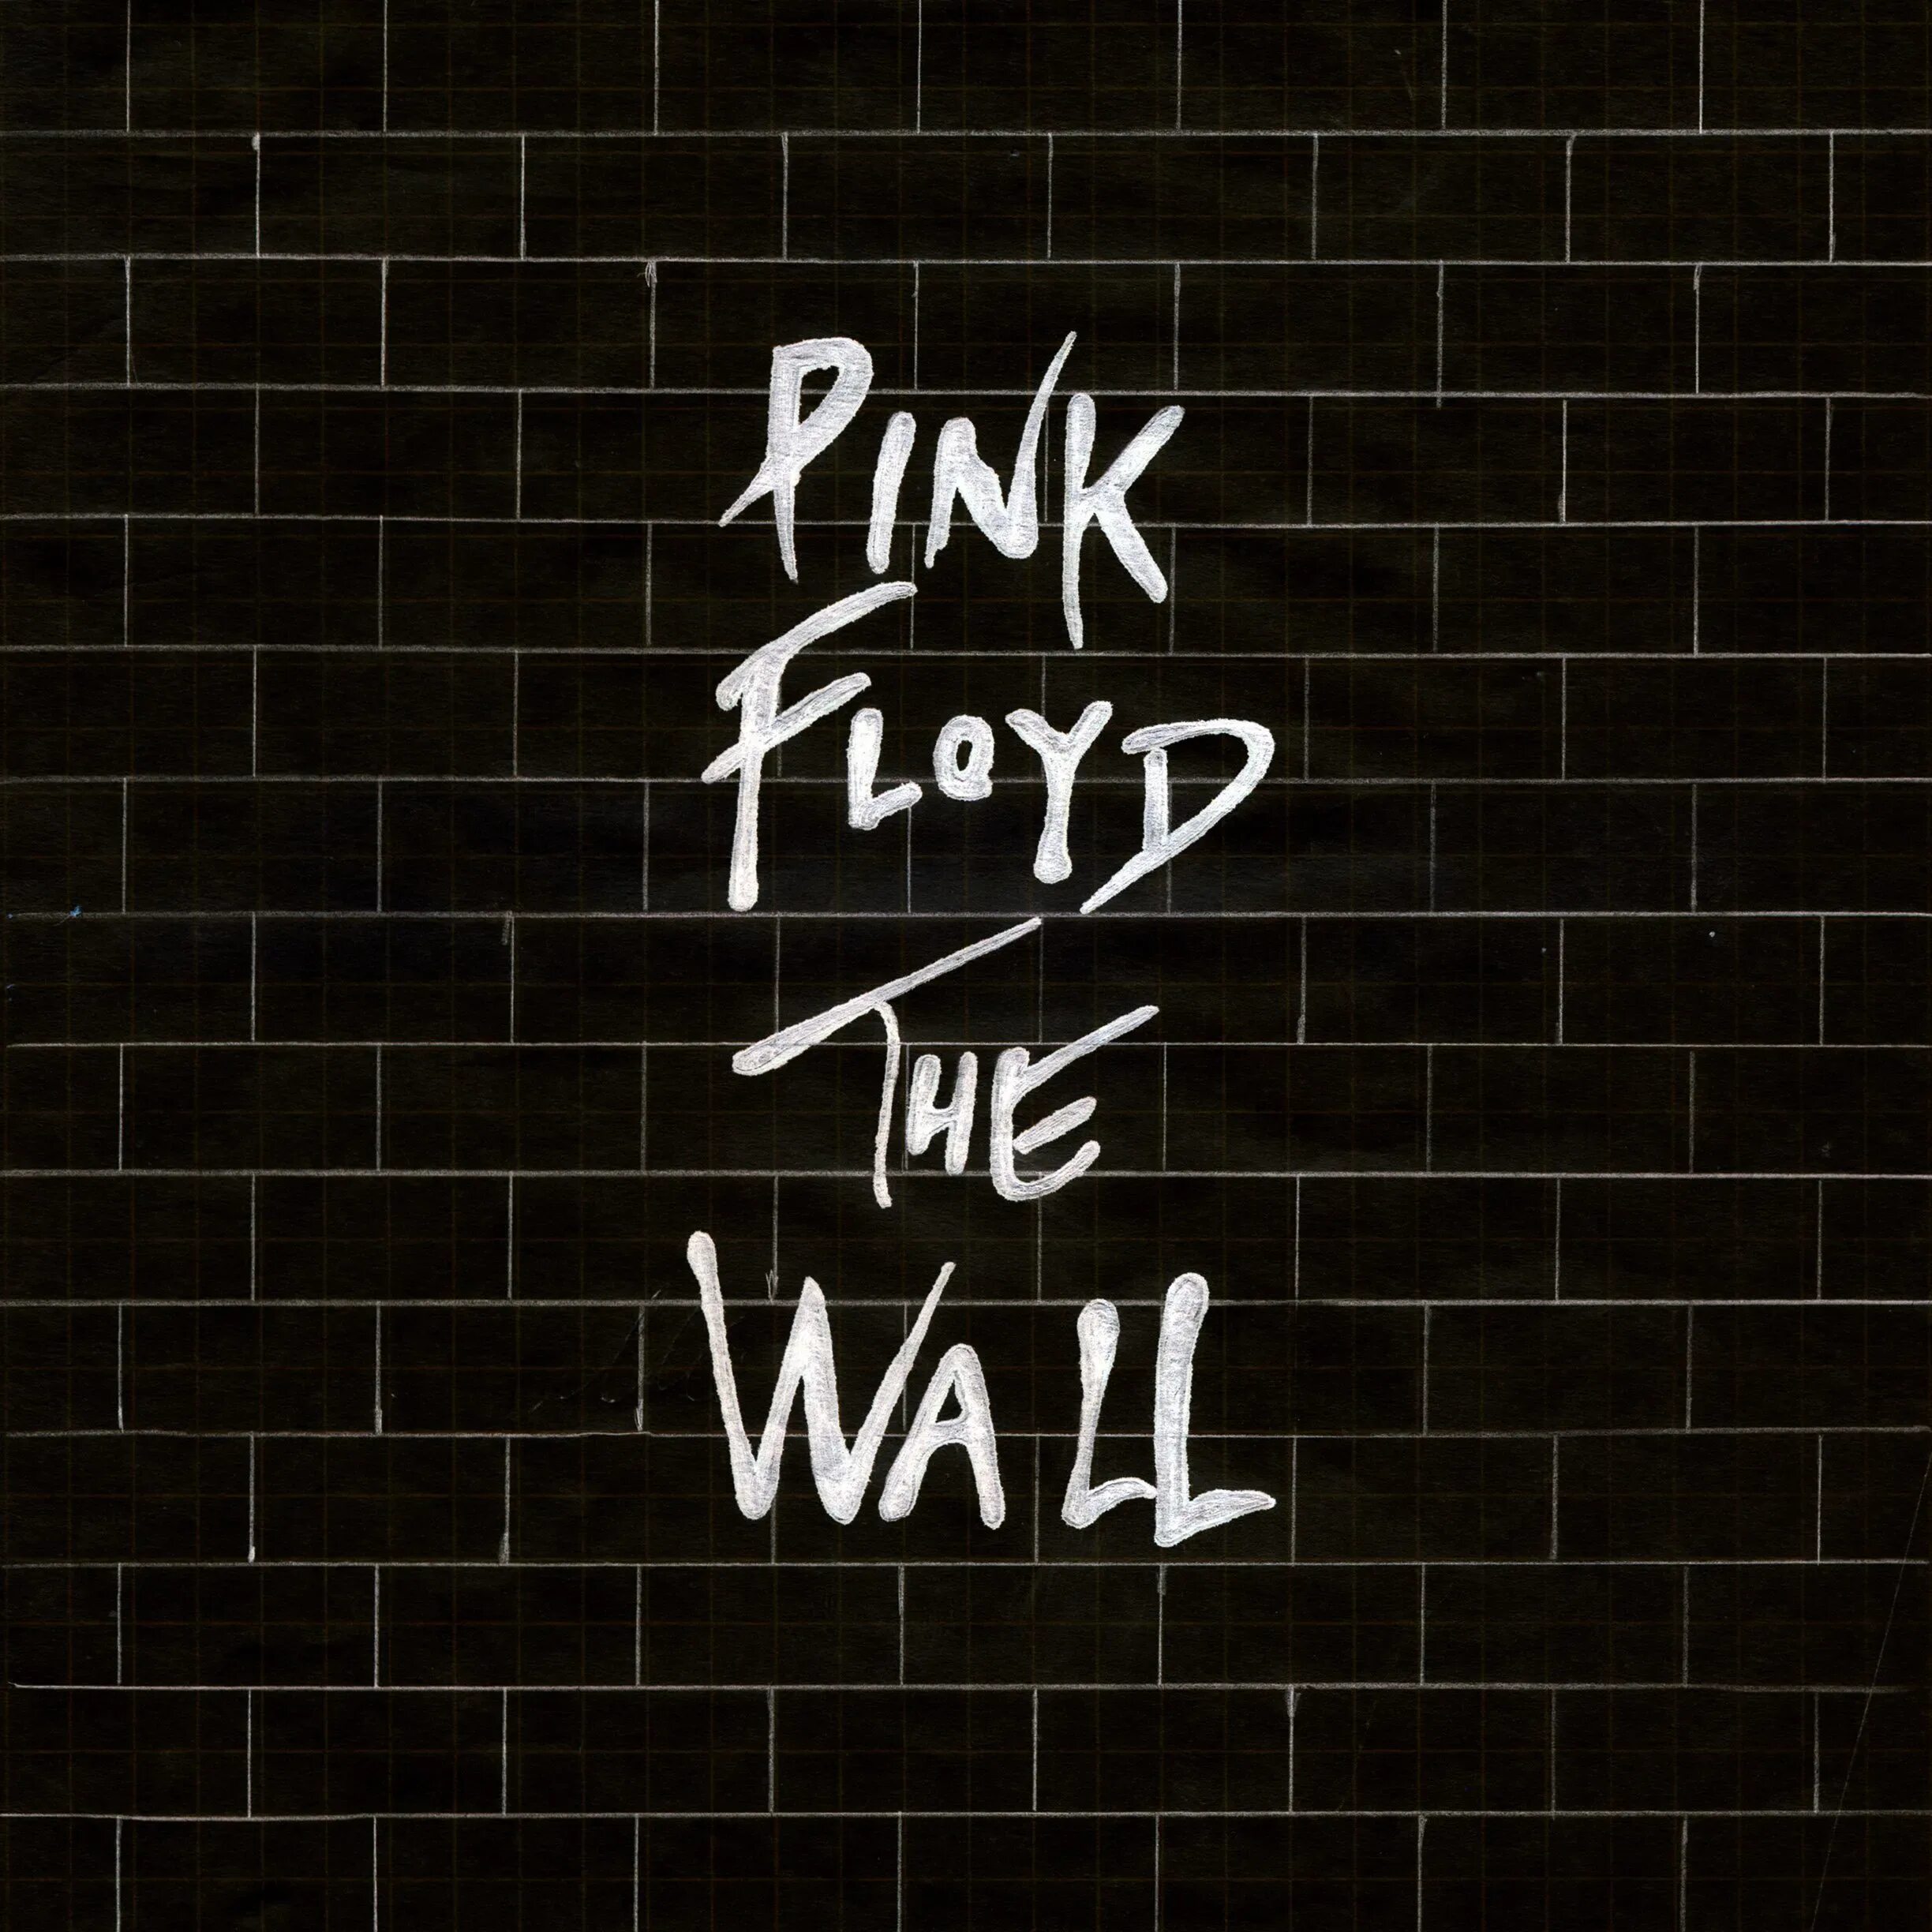 Walls cover. Pink Floyd the Wall обложка. Pink Floyd 1979 the Wall обложка. Pink Floyd the Wall обои. Альбом the Wall.